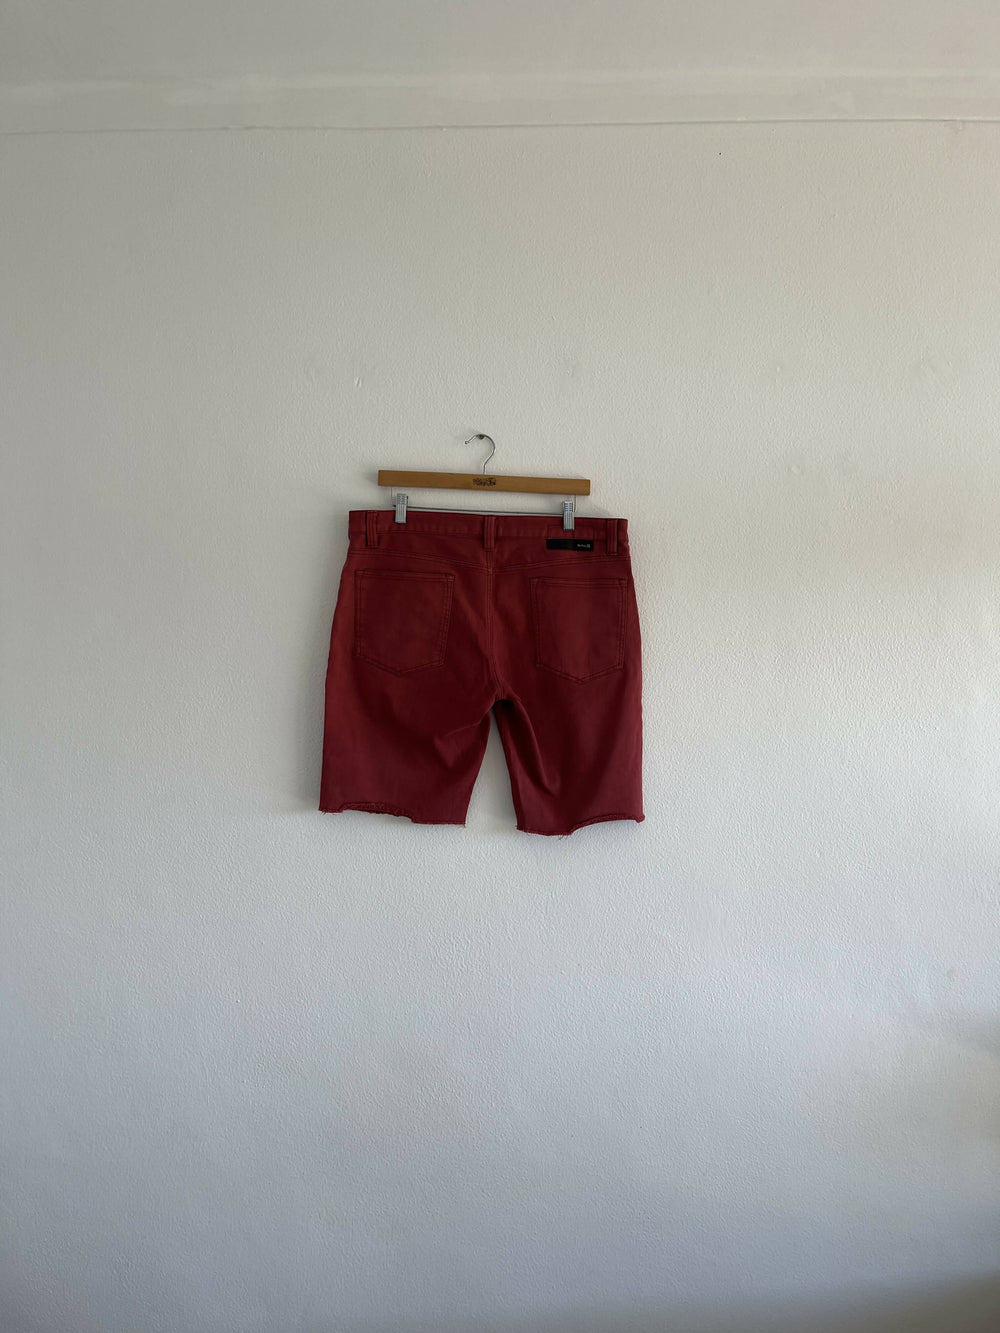 Image of Hurley Shorts (Red)